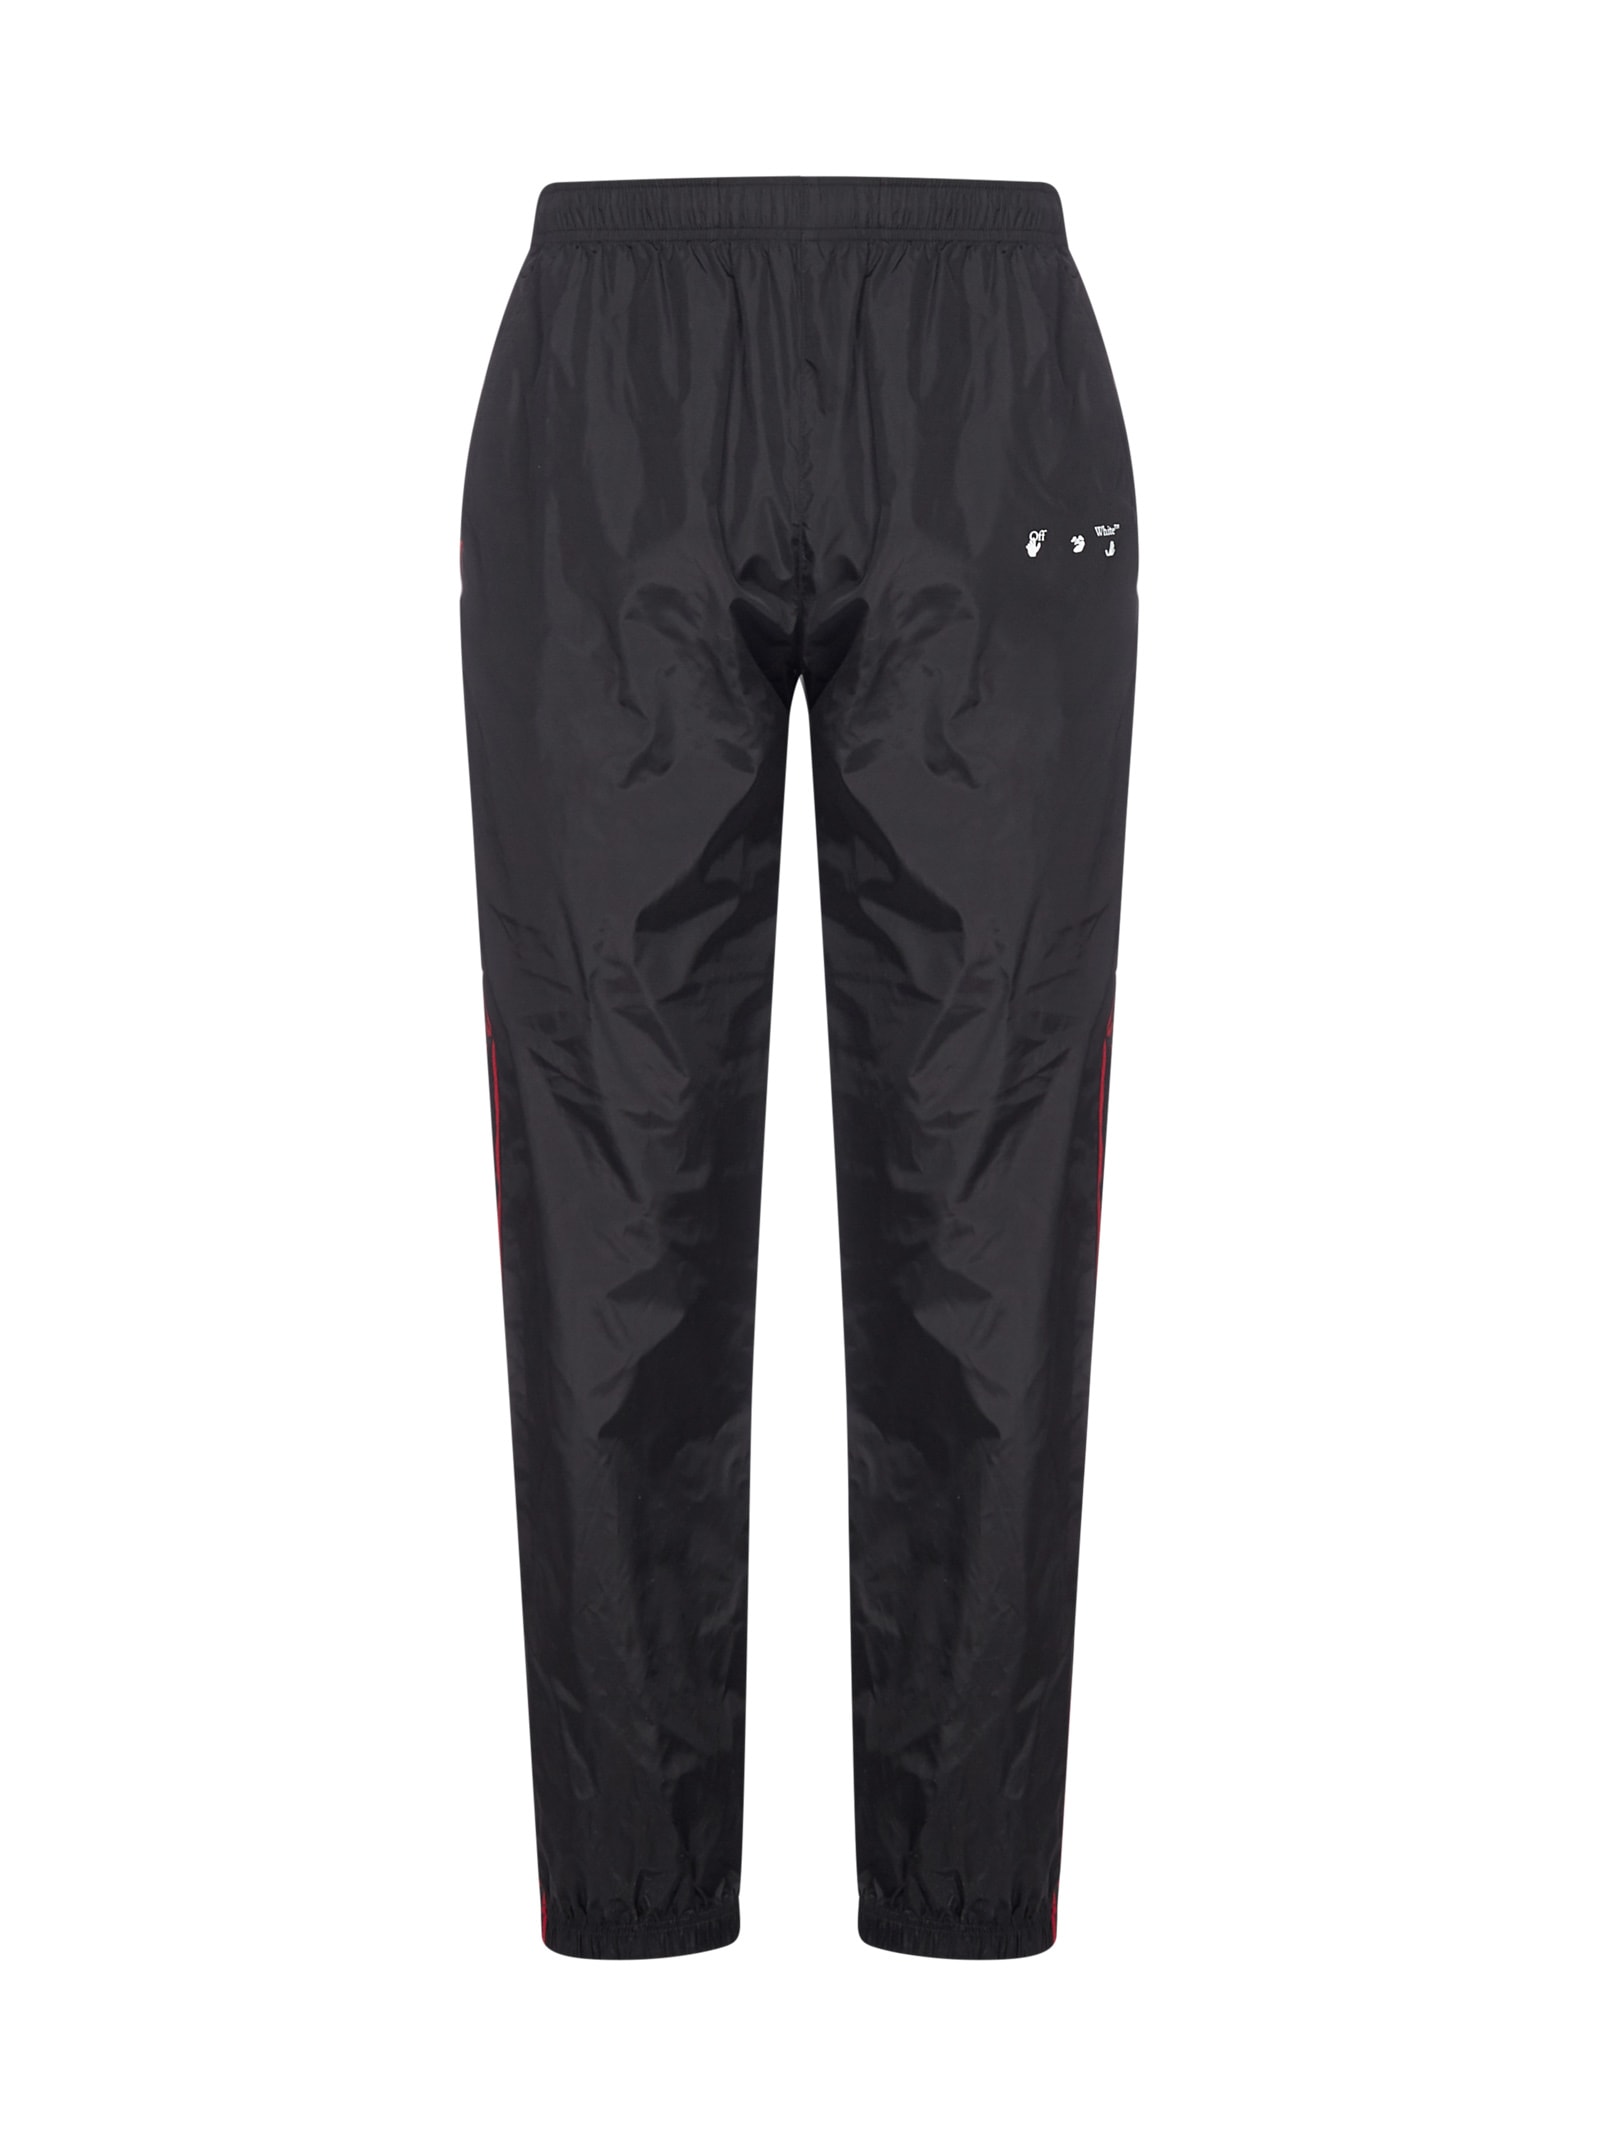 Off-White Ow-logo Striped Track Pants